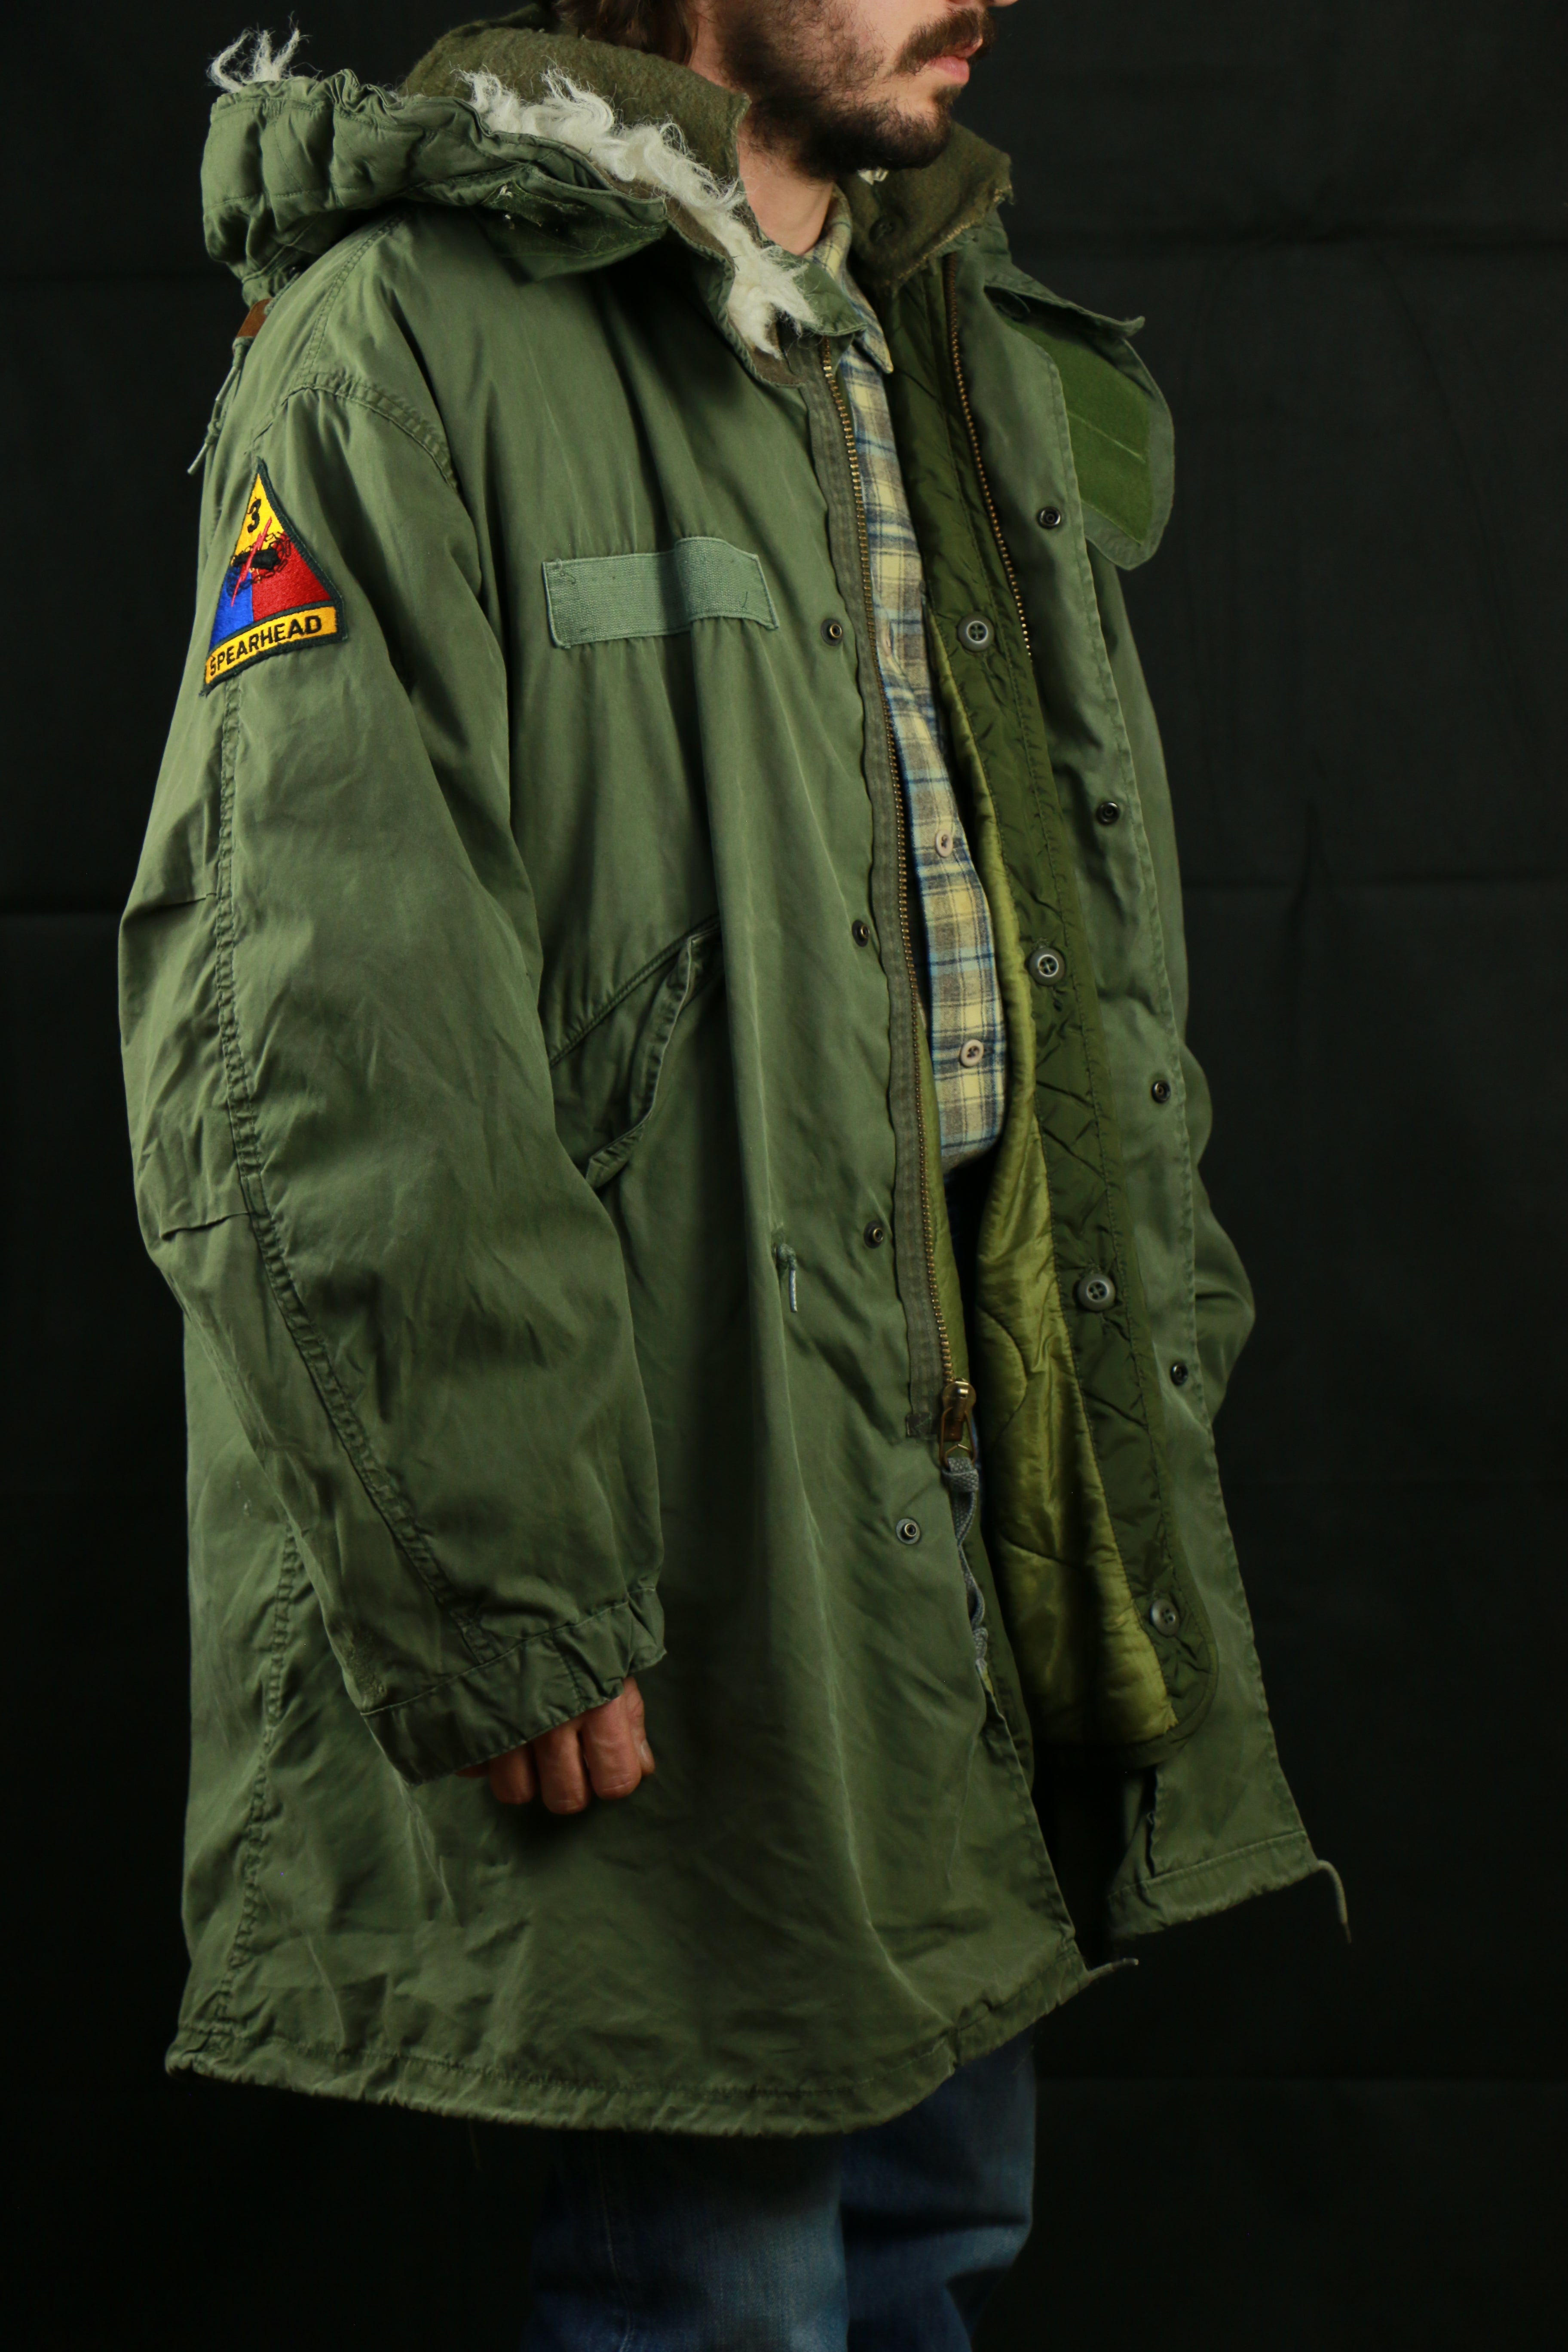 US Army Extreme Cold Weather Fishtail Parka